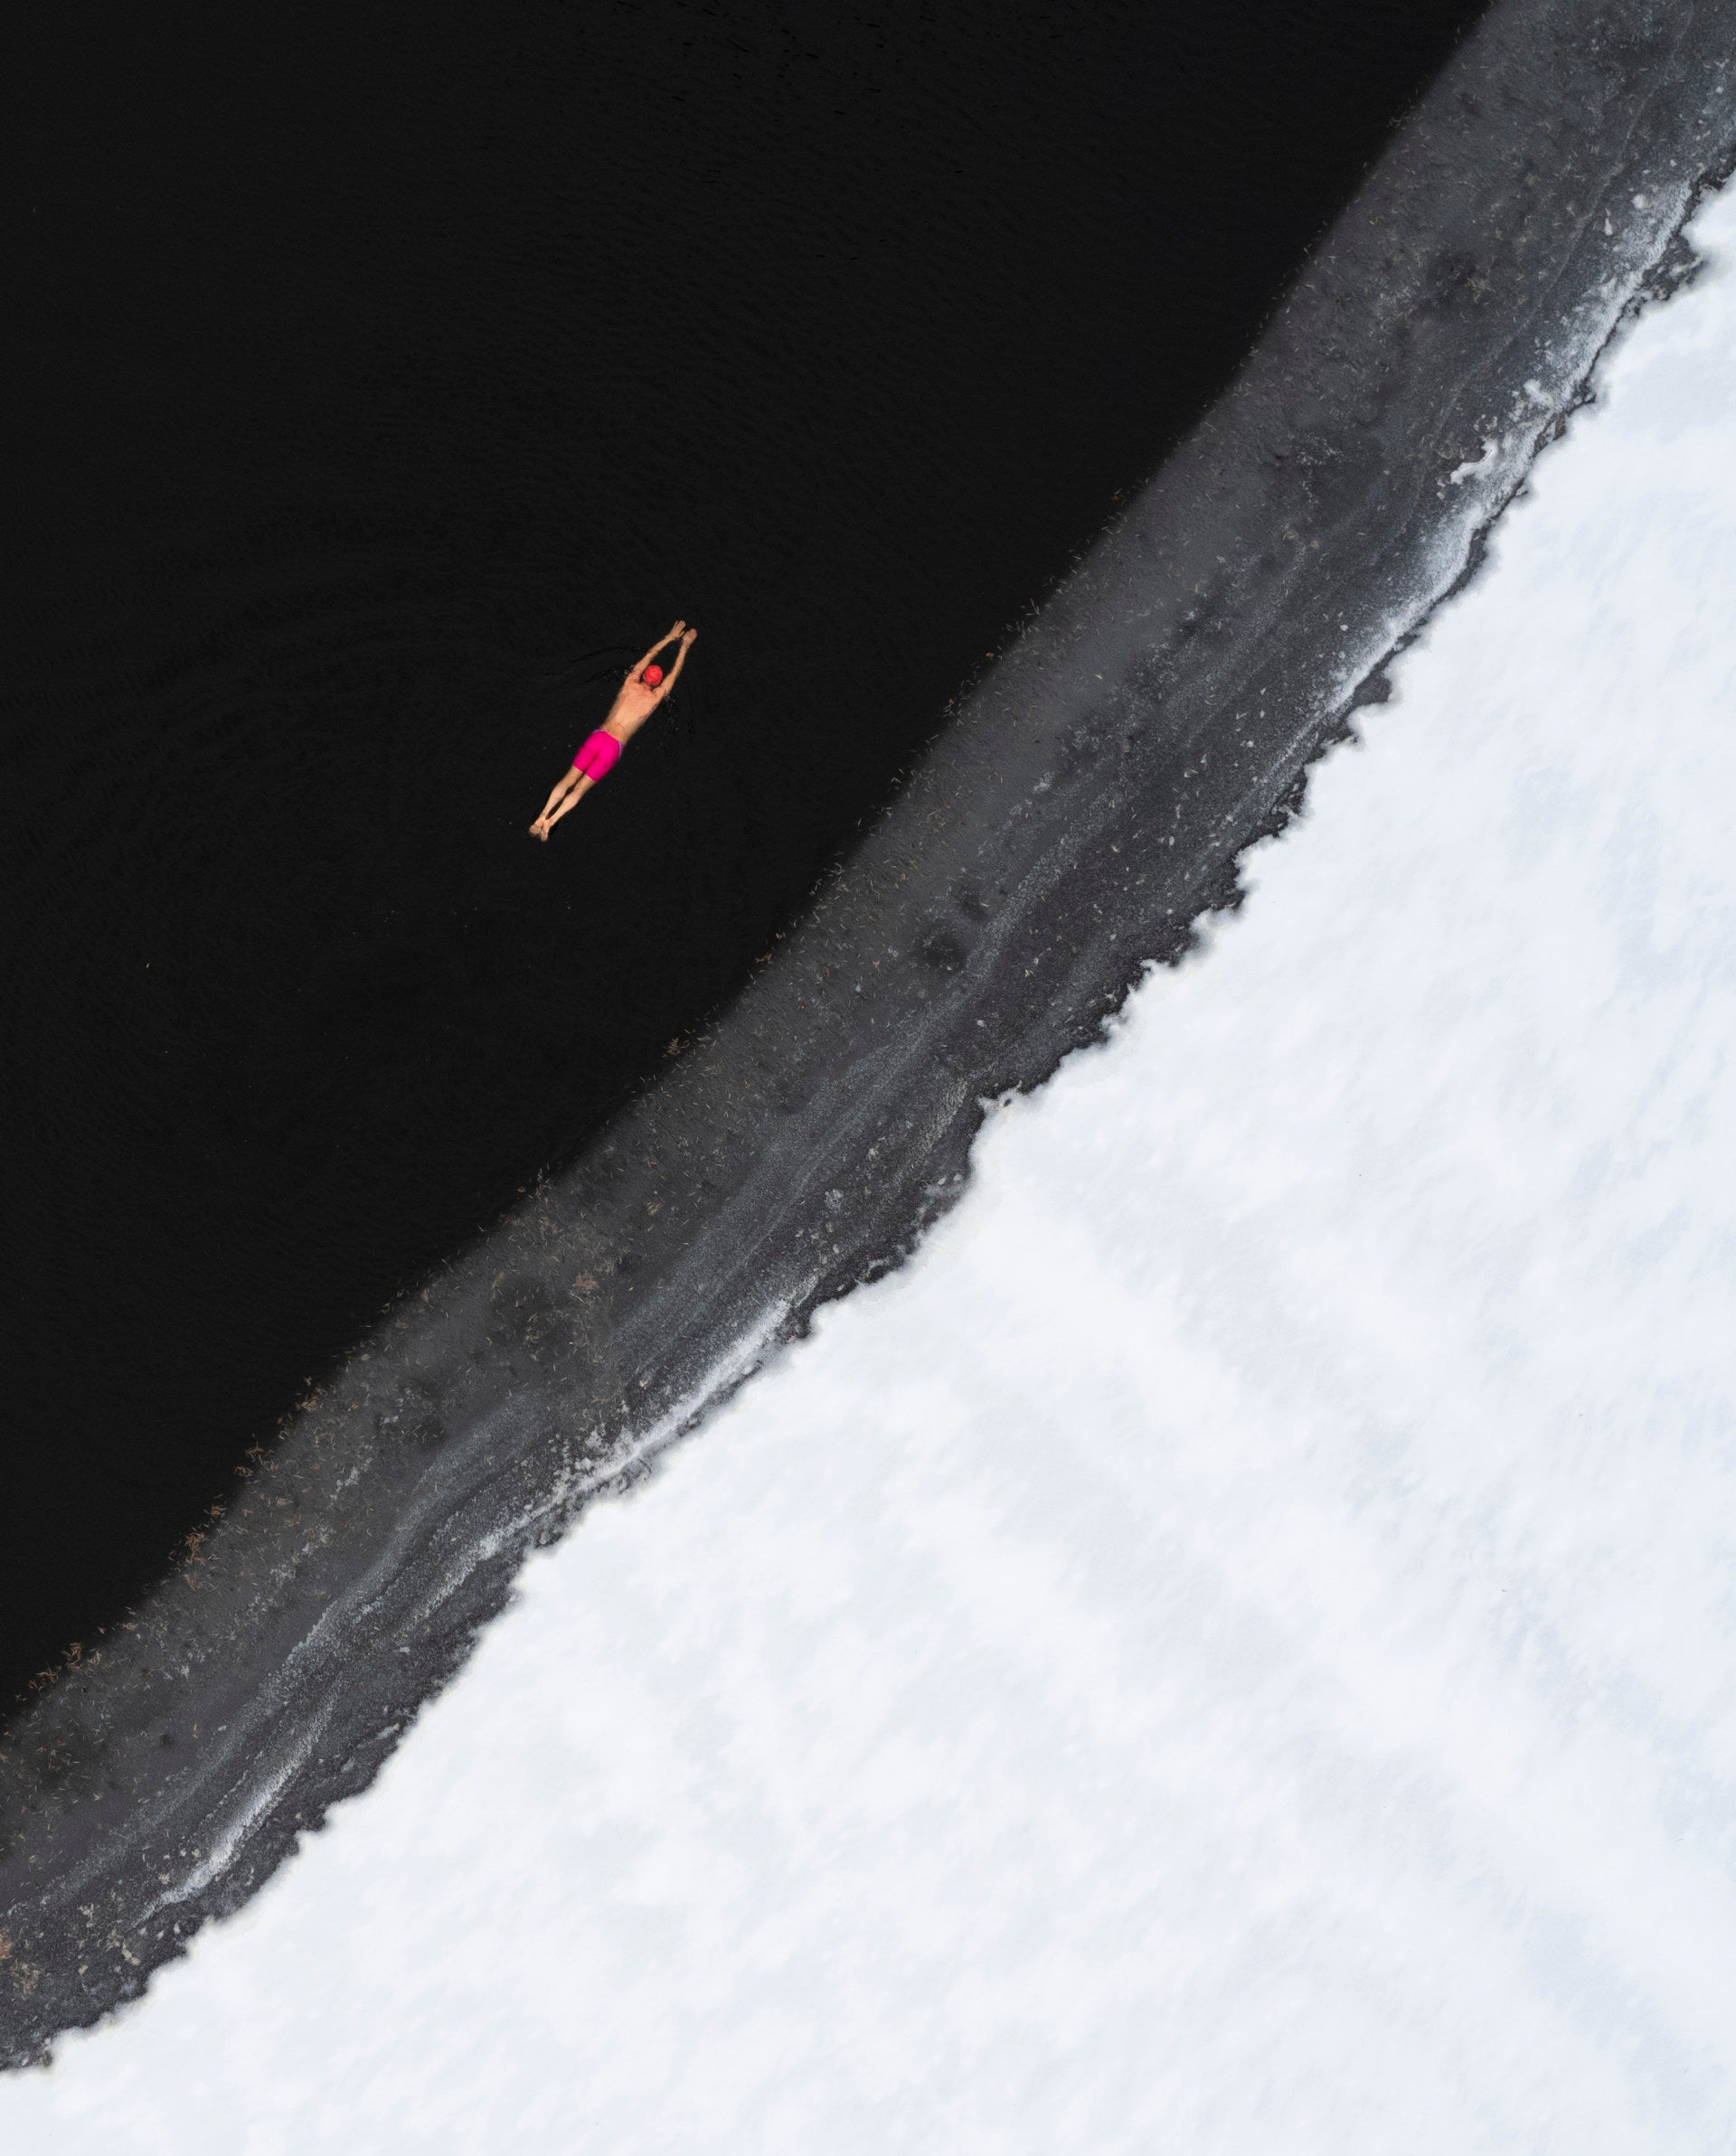 A man in a pink bathing suit swims in a nearly frozen body of water.